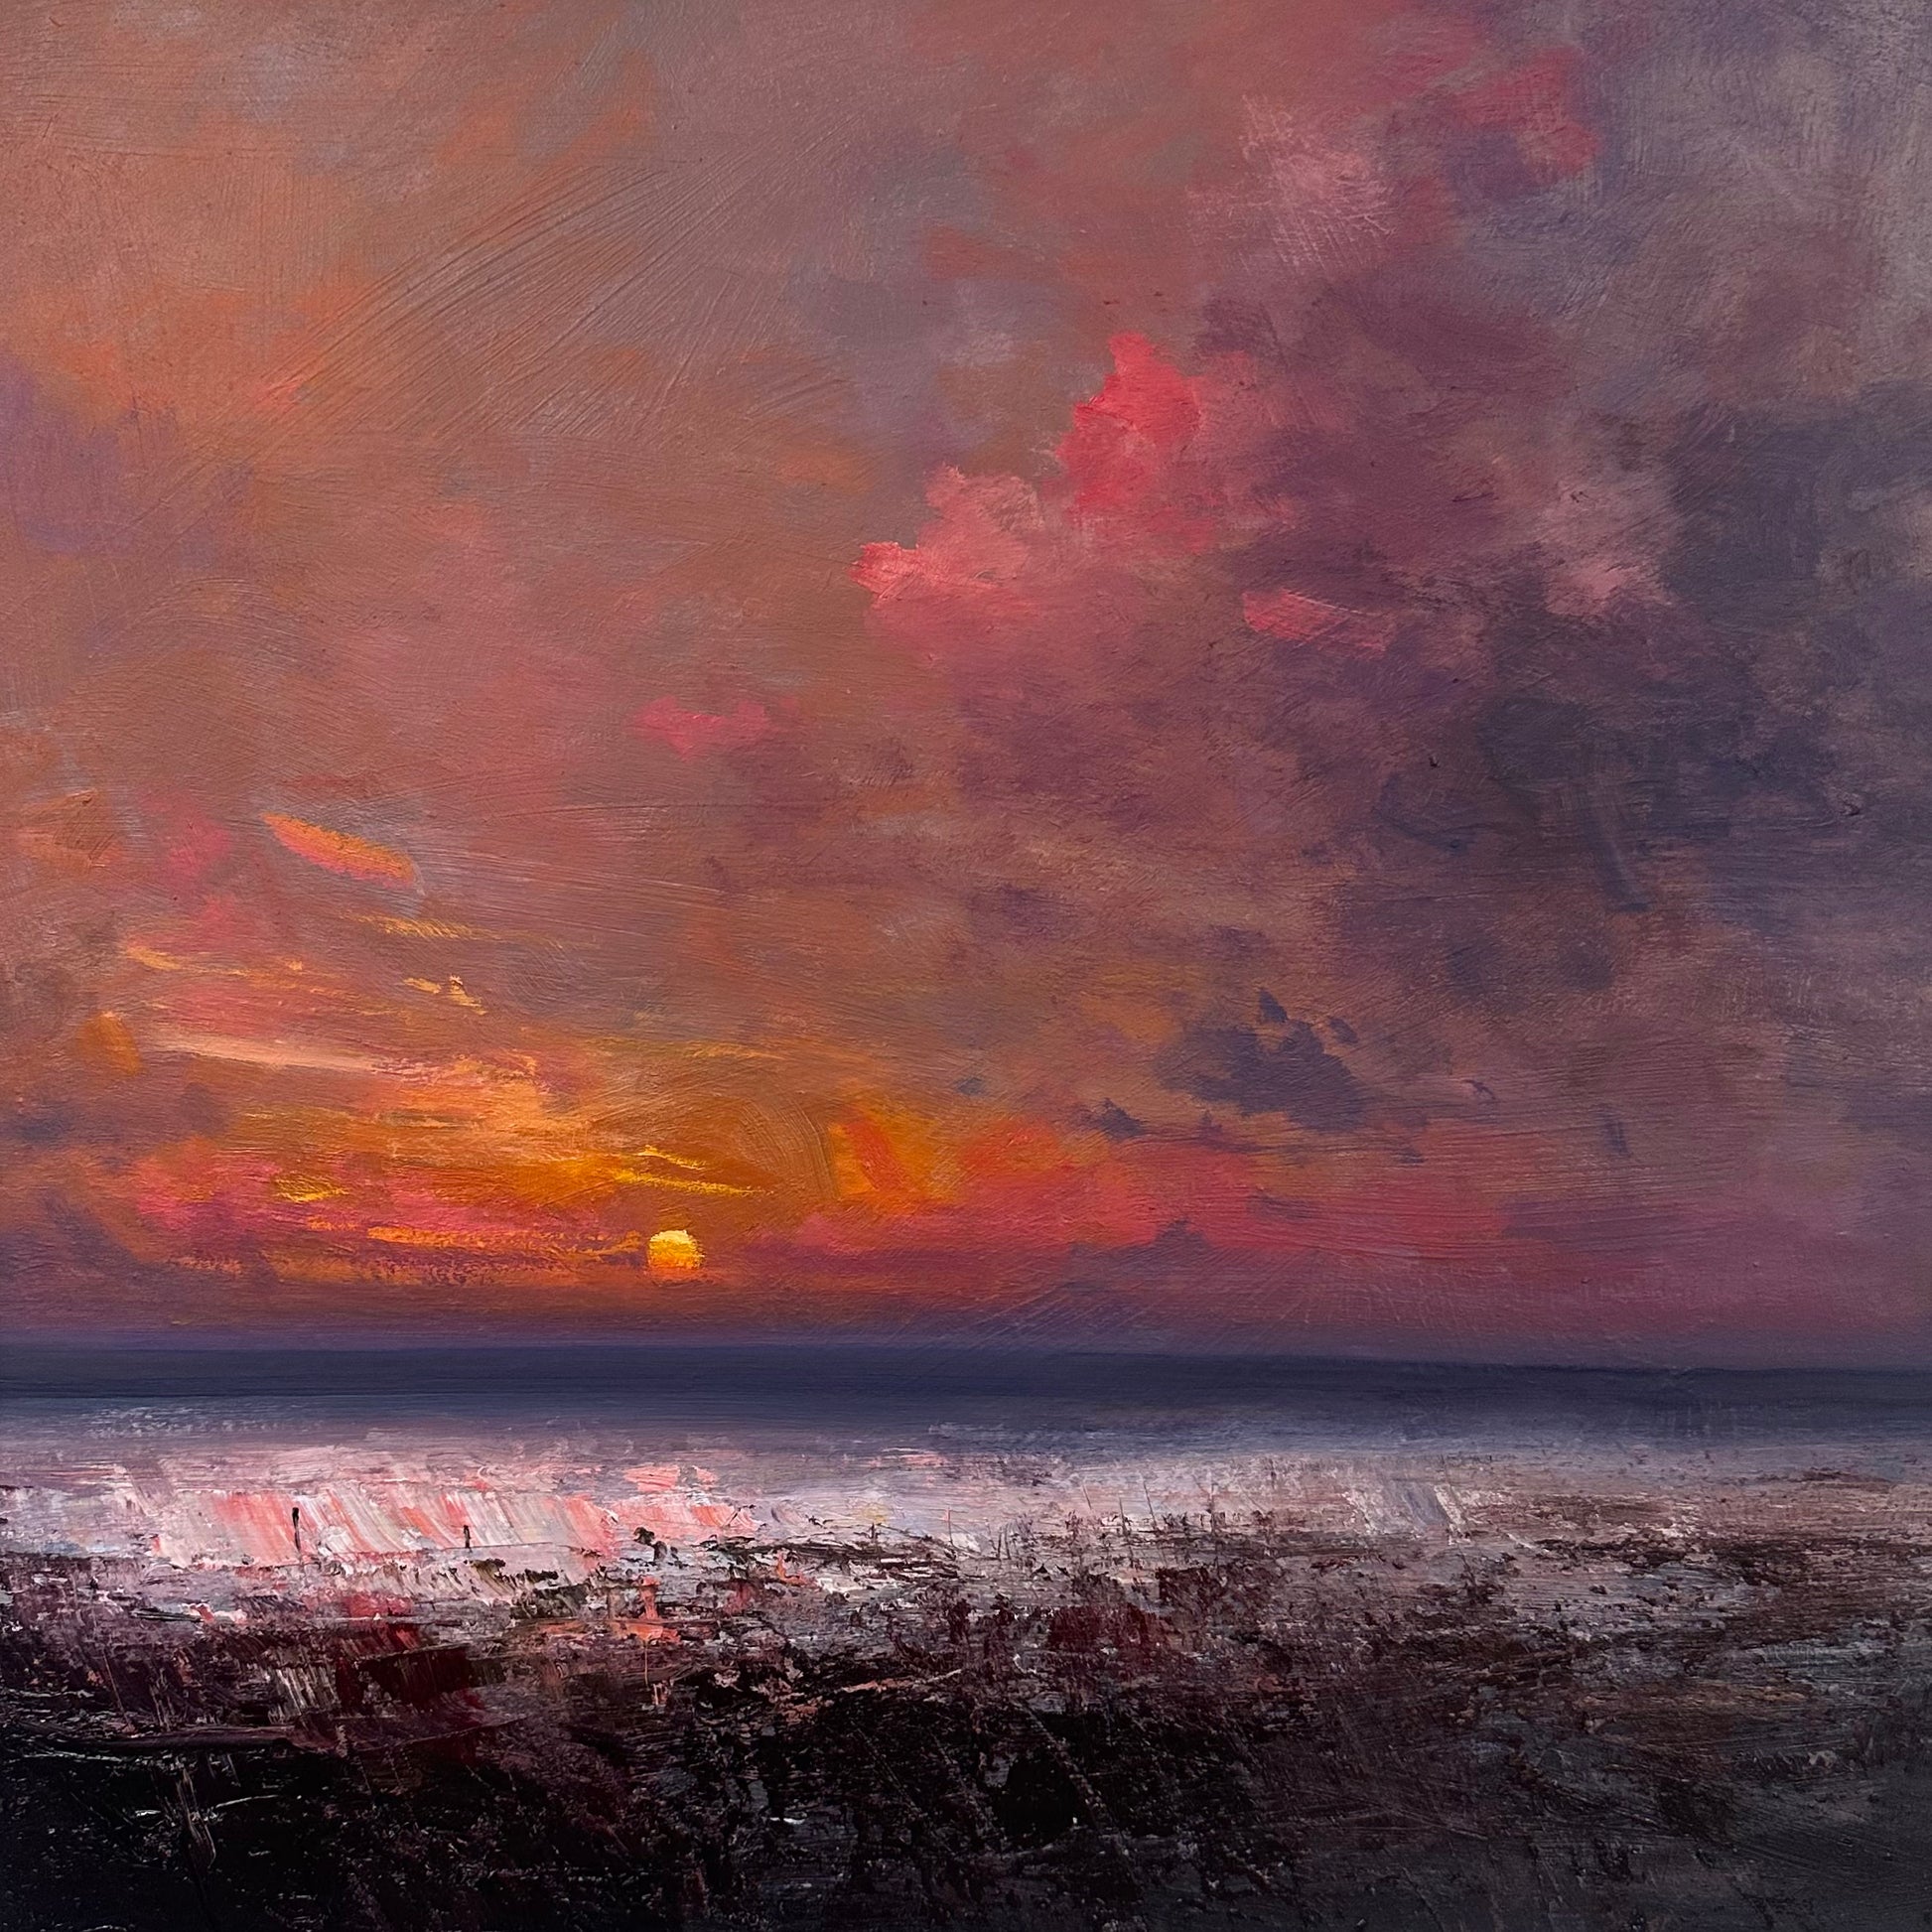 When we crashed the sun, Oil on panel painting by Richard K Blades. Available from The Point Contemporary, Art Gallery in Cromer, North Norfolk UK